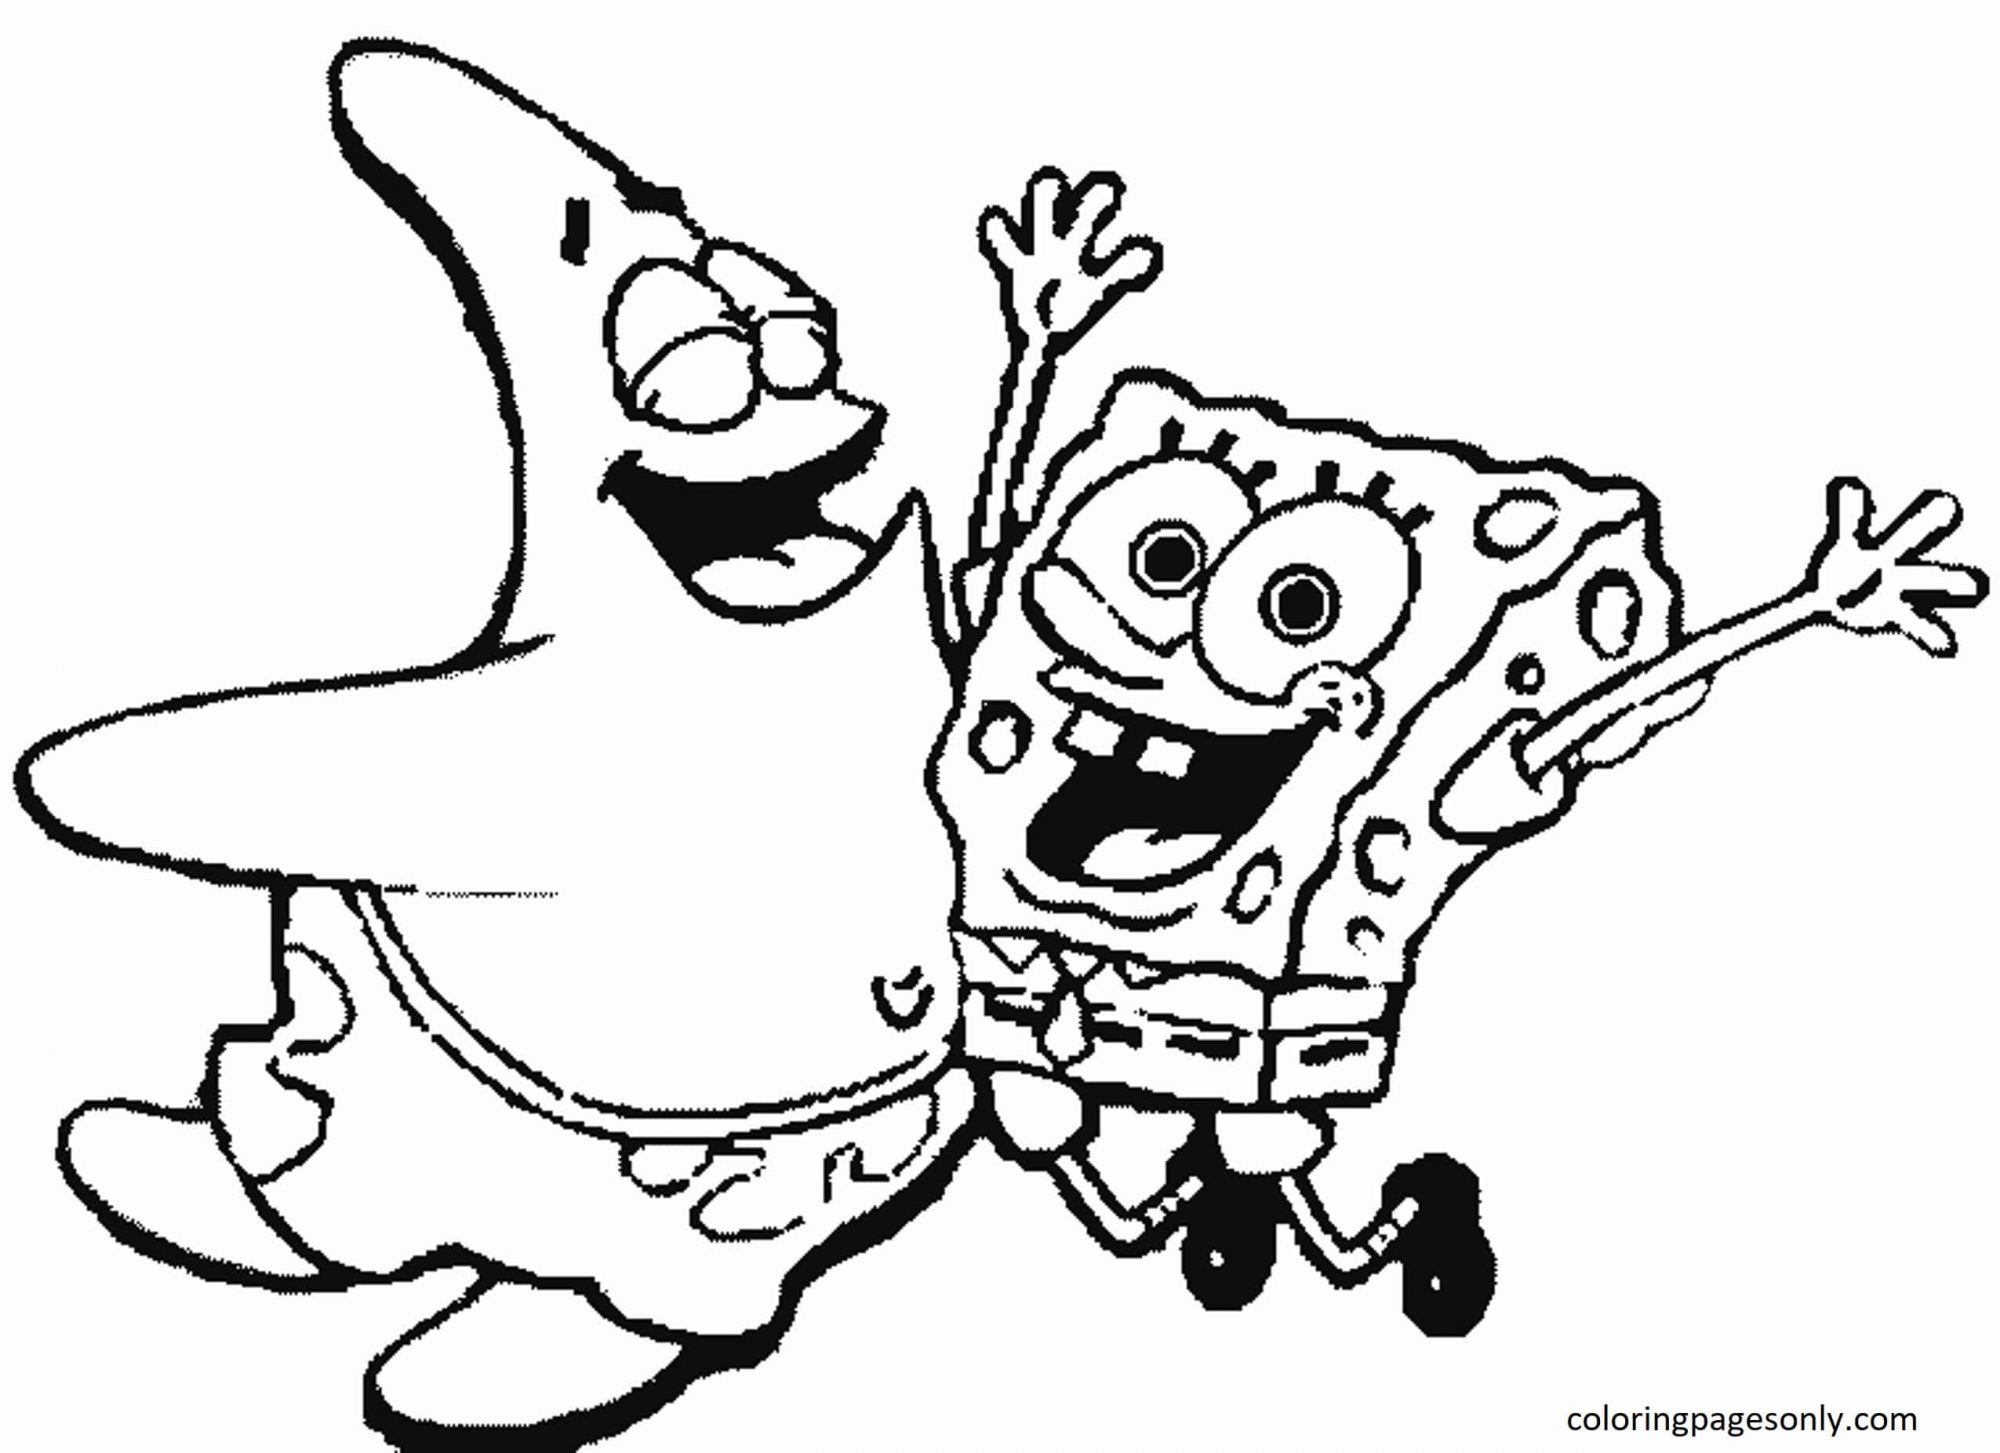 Spongebob And Patrick 2 Coloring Pages